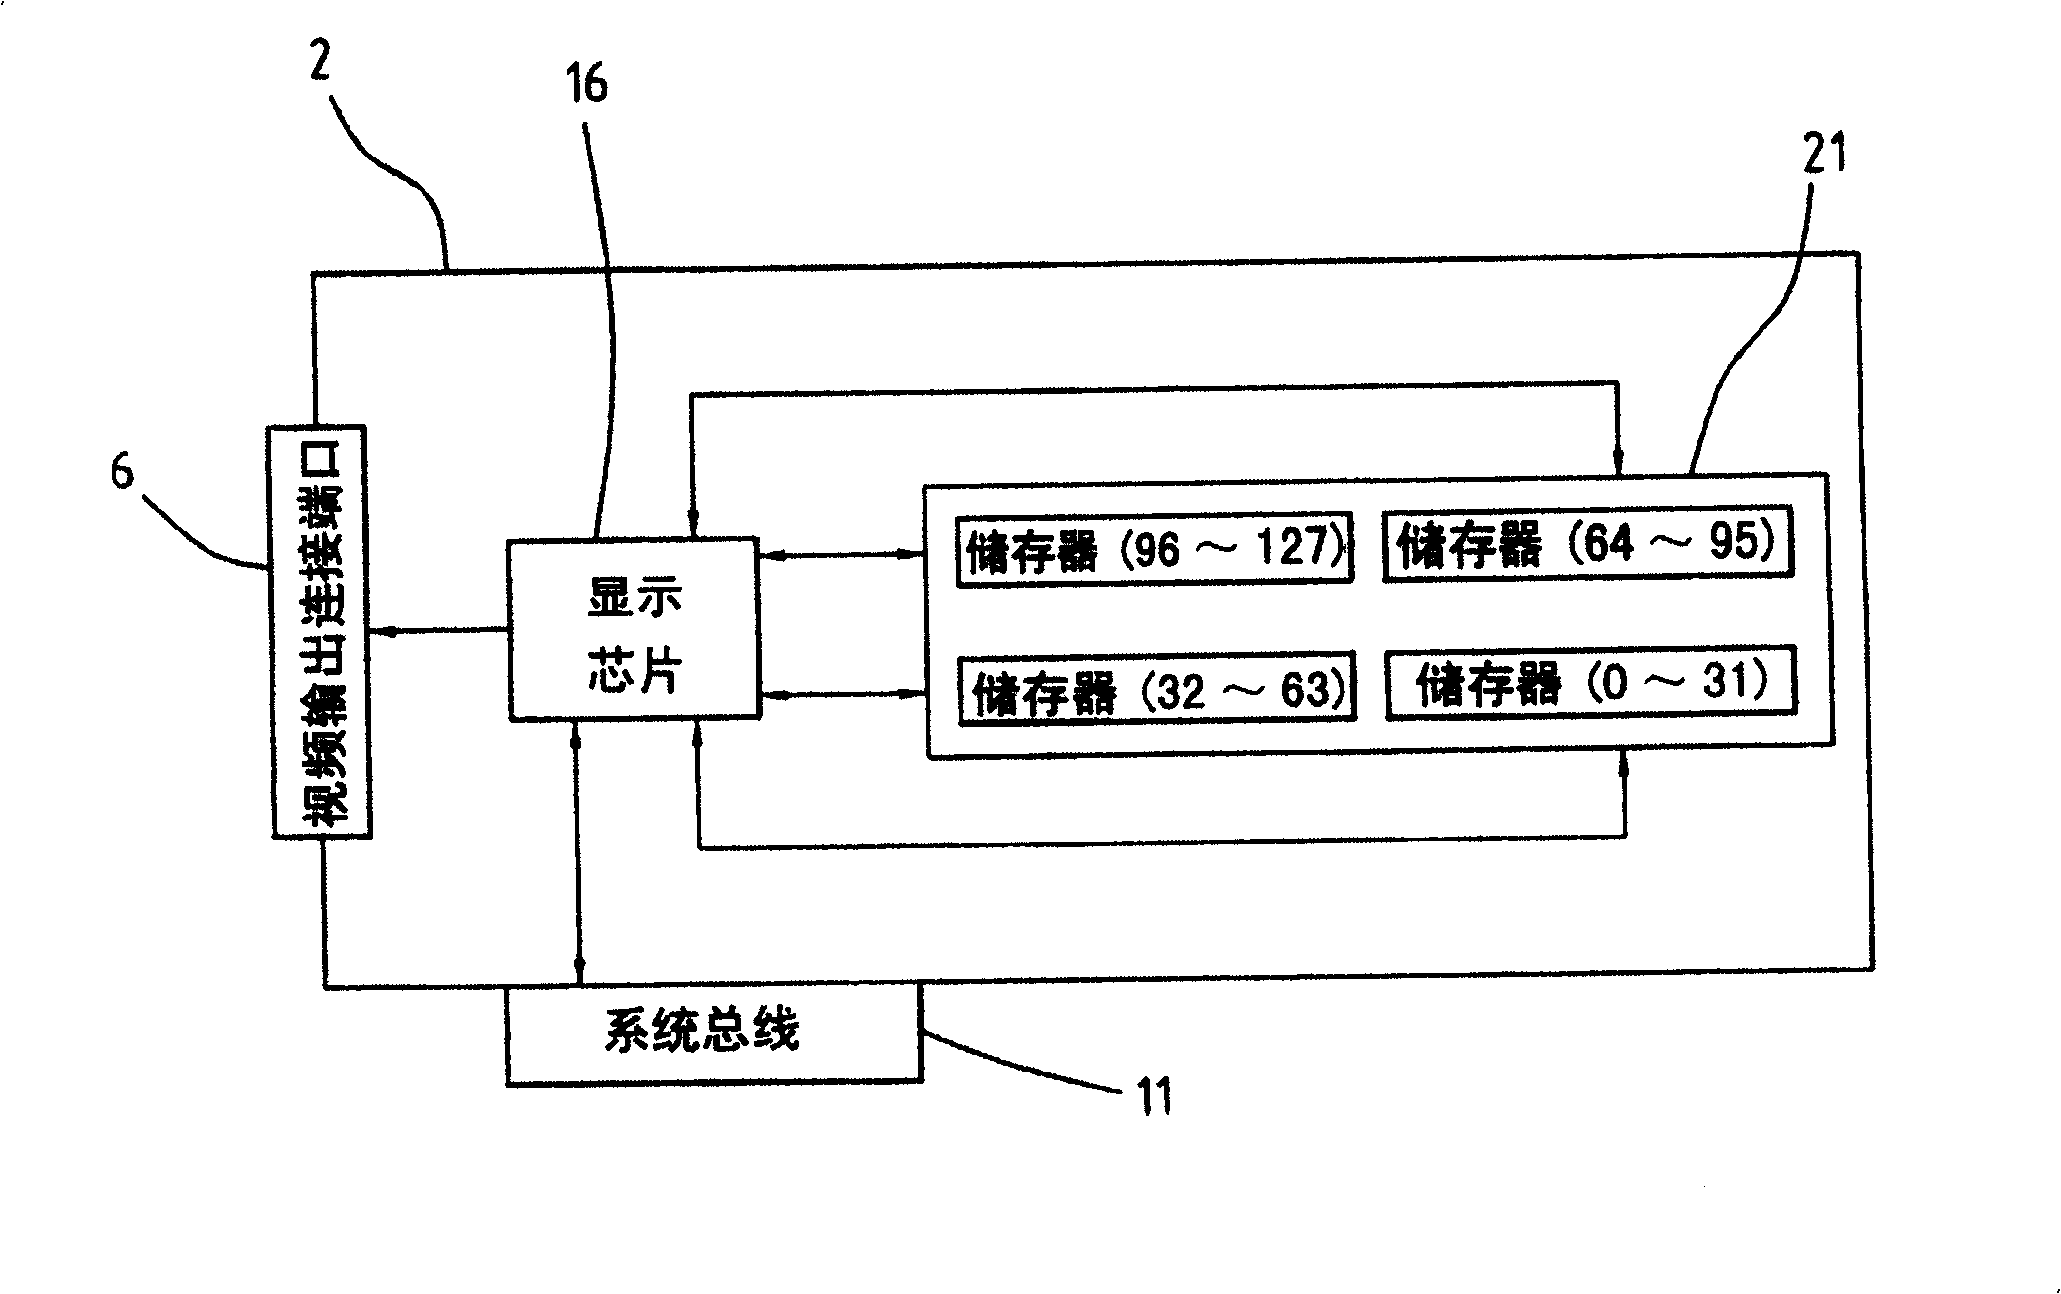 Memory bus wiring structure and wiring method for low profile display card